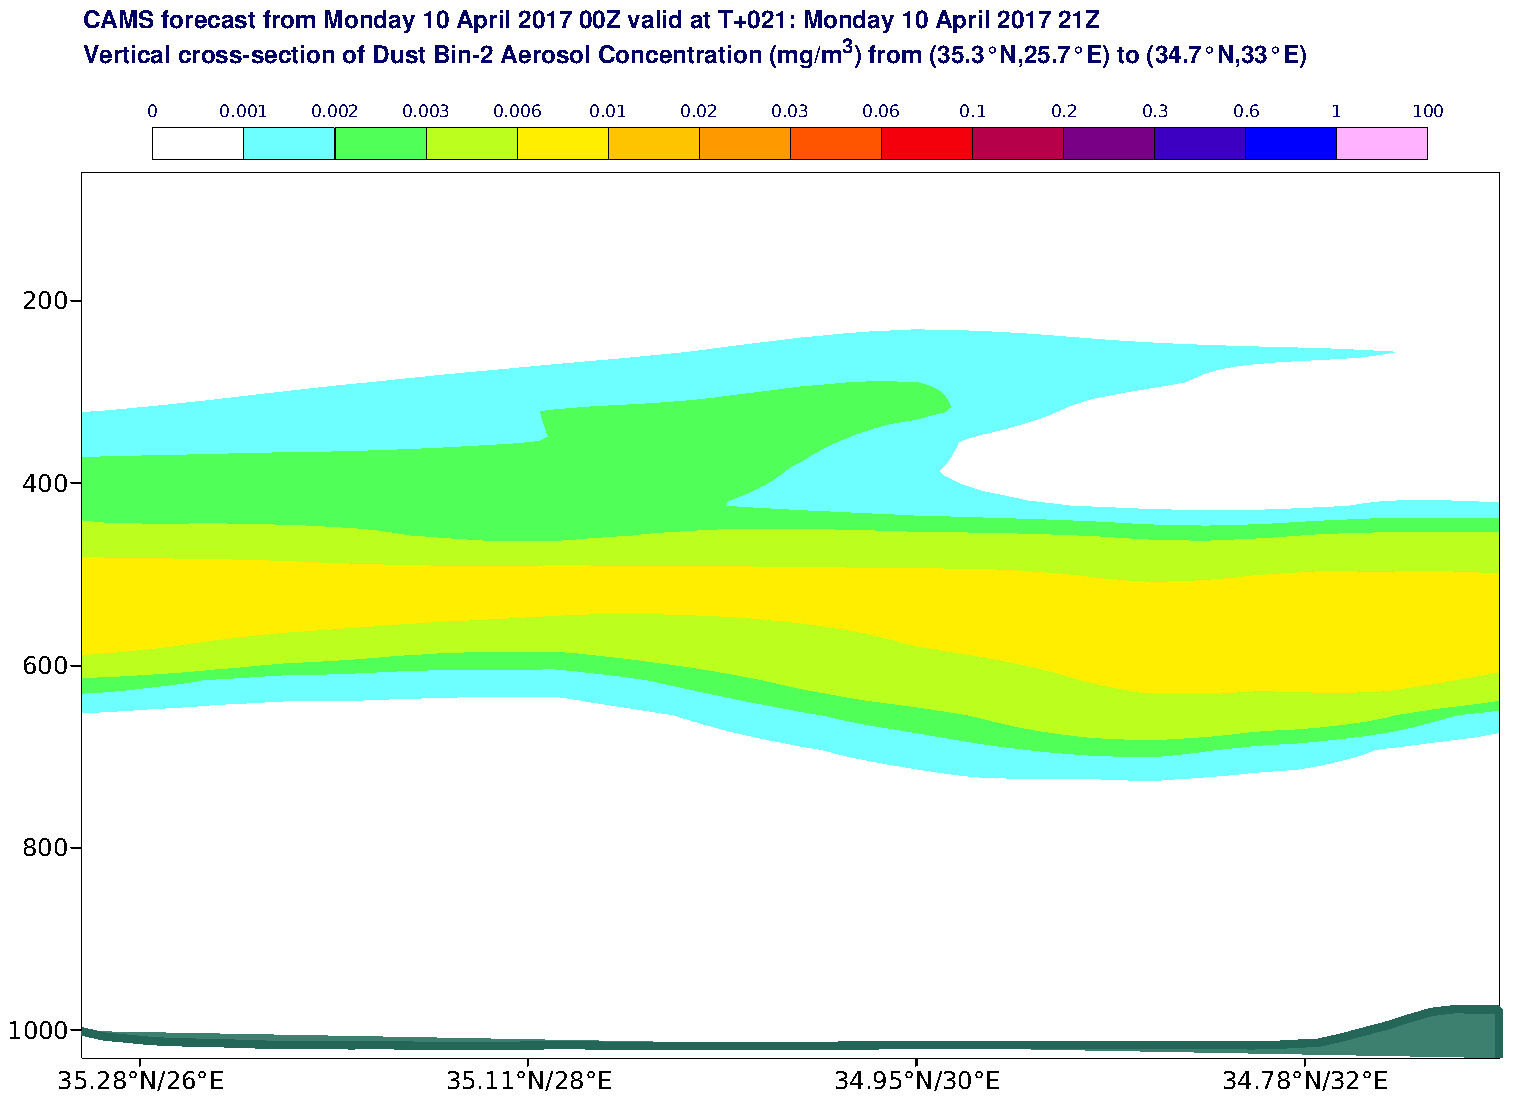 Vertical cross-section of Dust Bin-2 Aerosol Concentration (mg/m3) valid at T21 - 2017-04-10 21:00